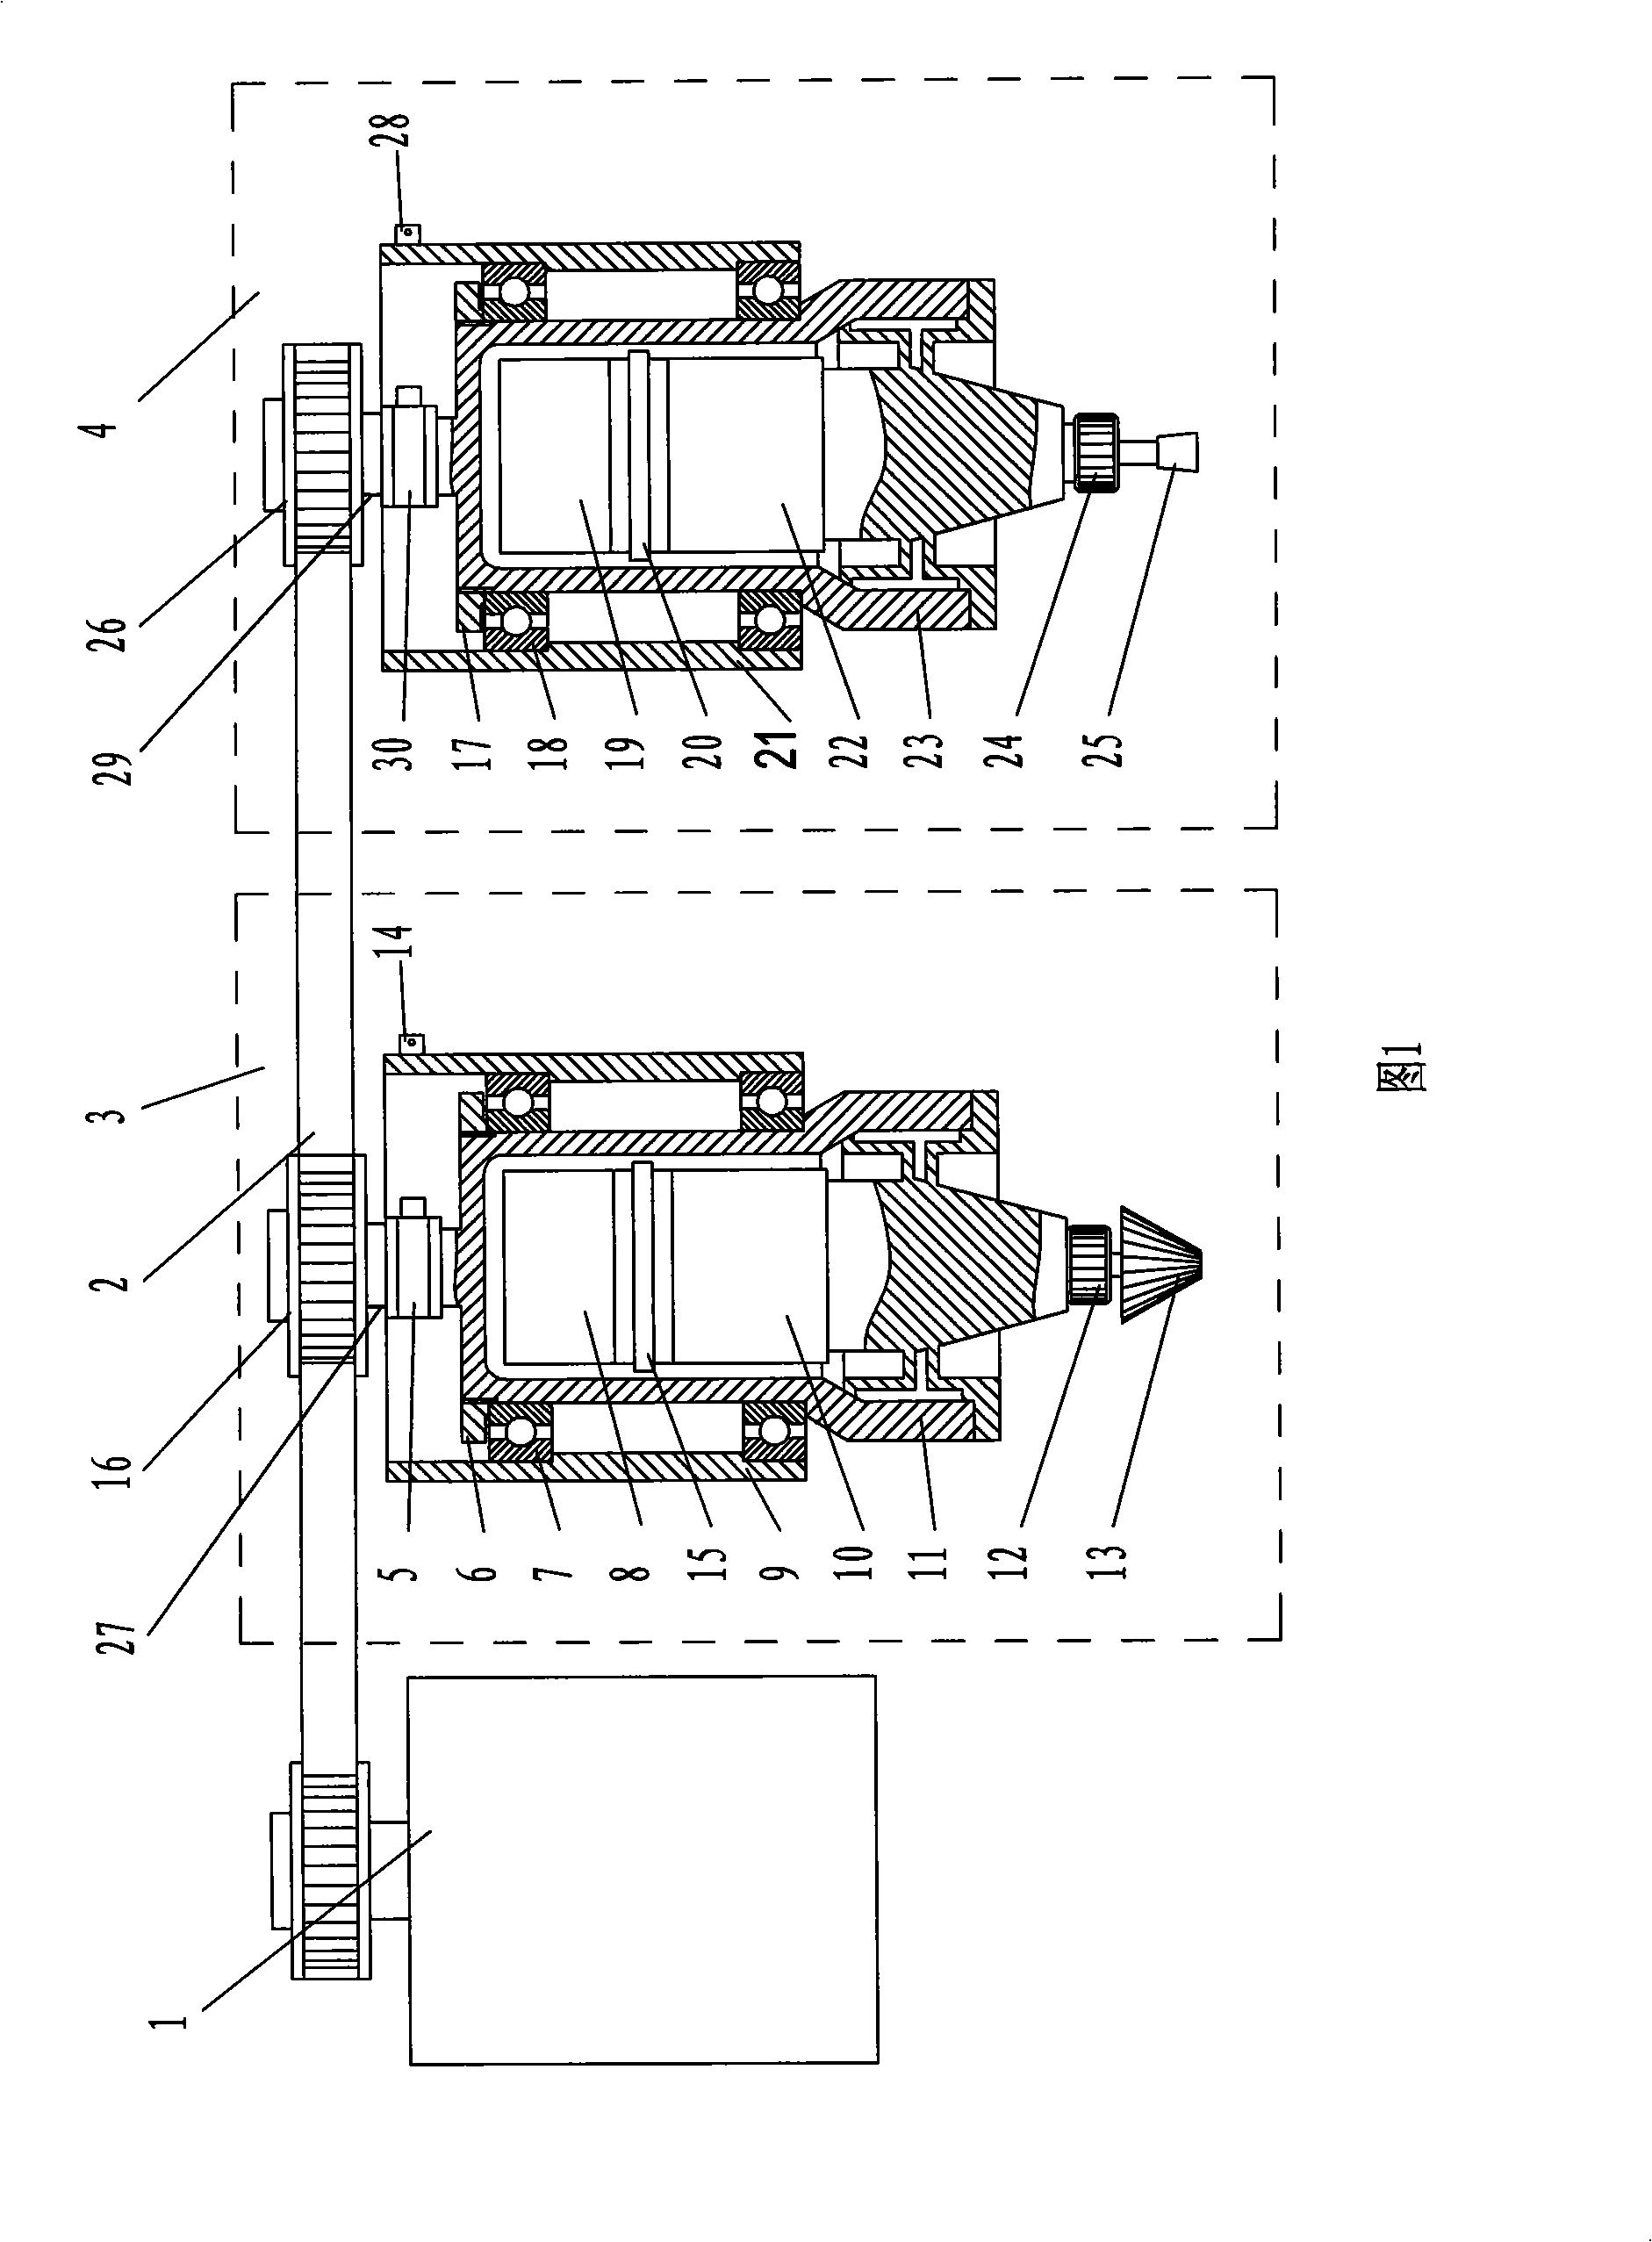 Numerically controlled machine knife tool on-line coping device